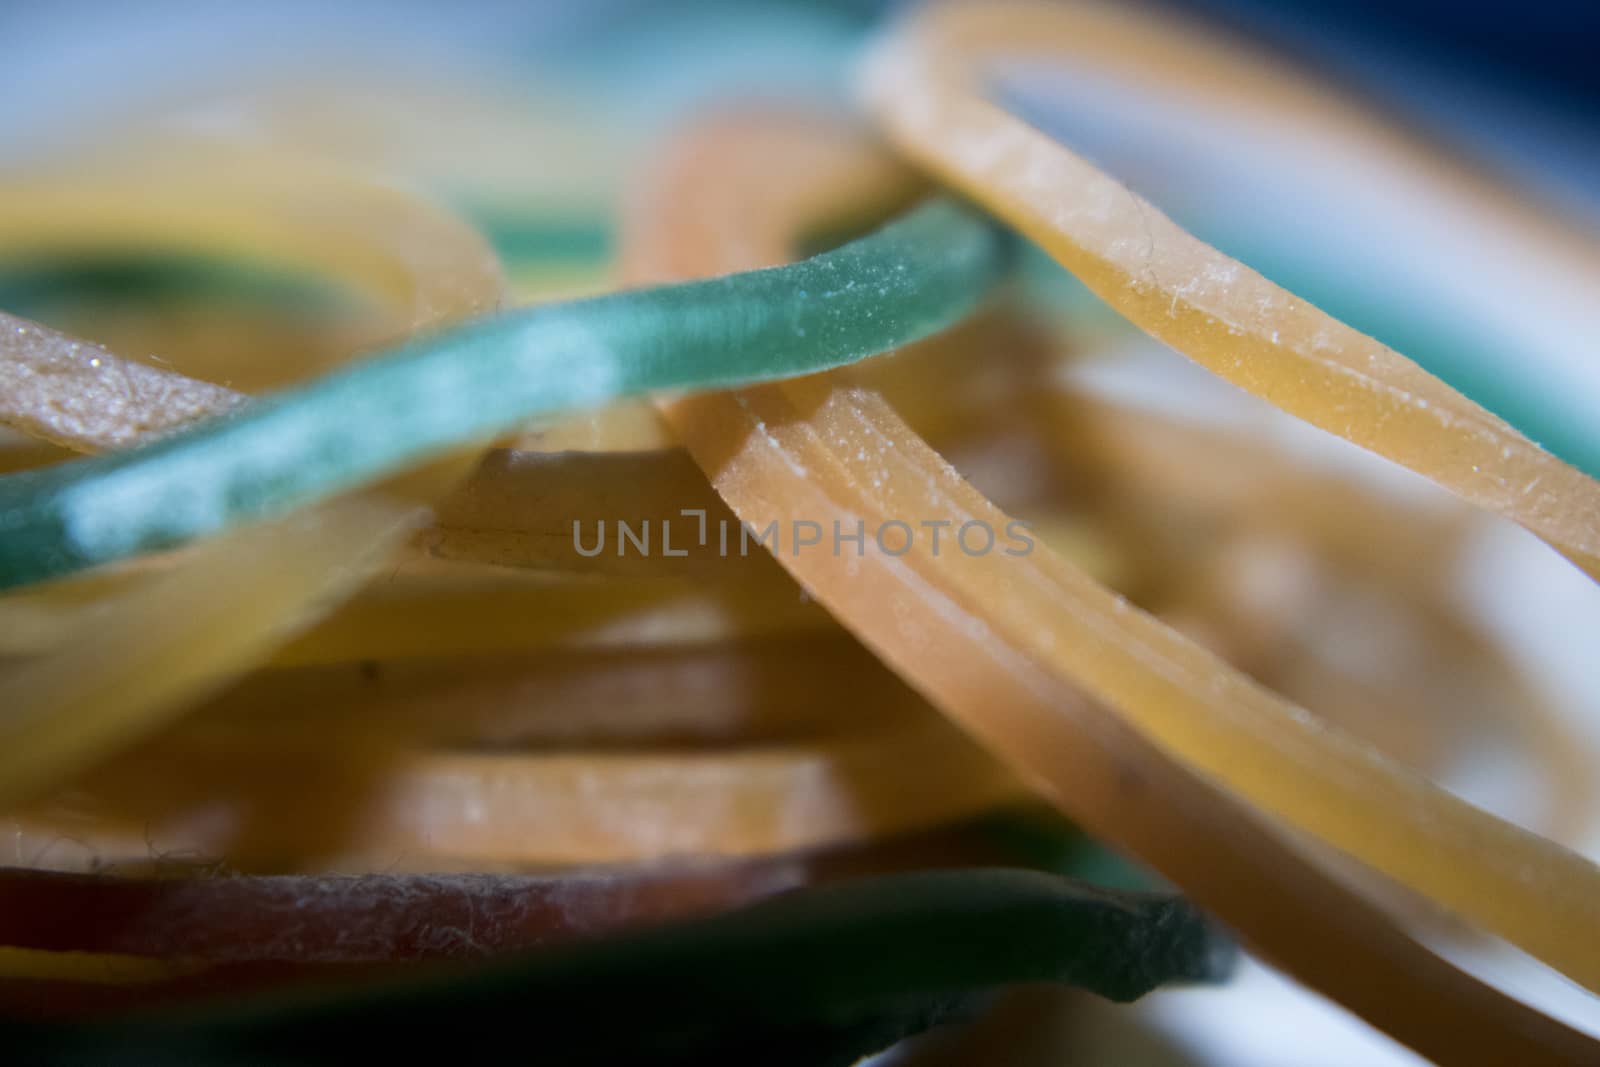 A colorful rubber bands as a background close-up photo